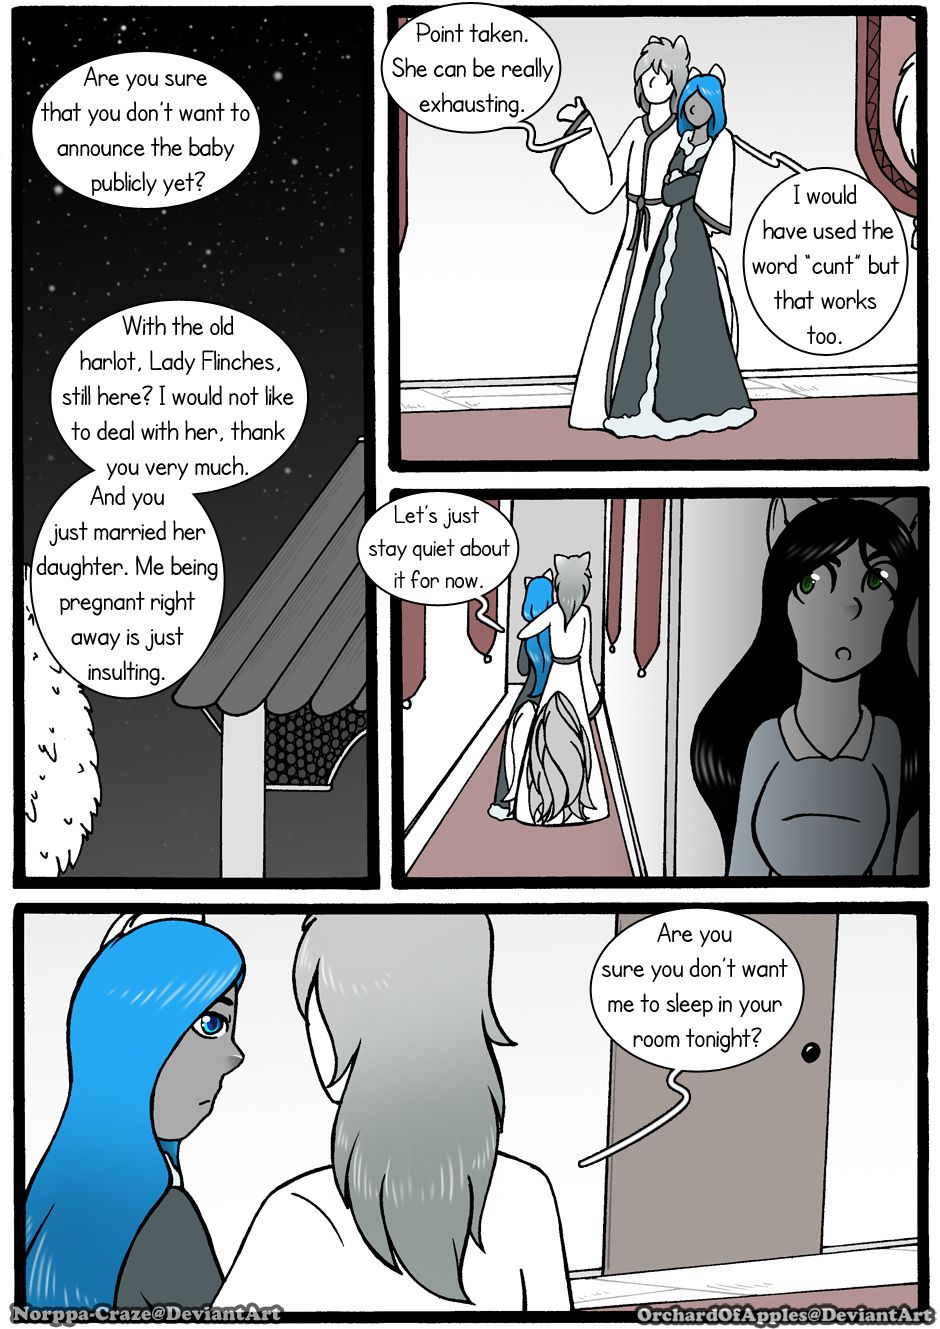 [Jeny-jen94] Between Kings and Queens [Ongoing] 266